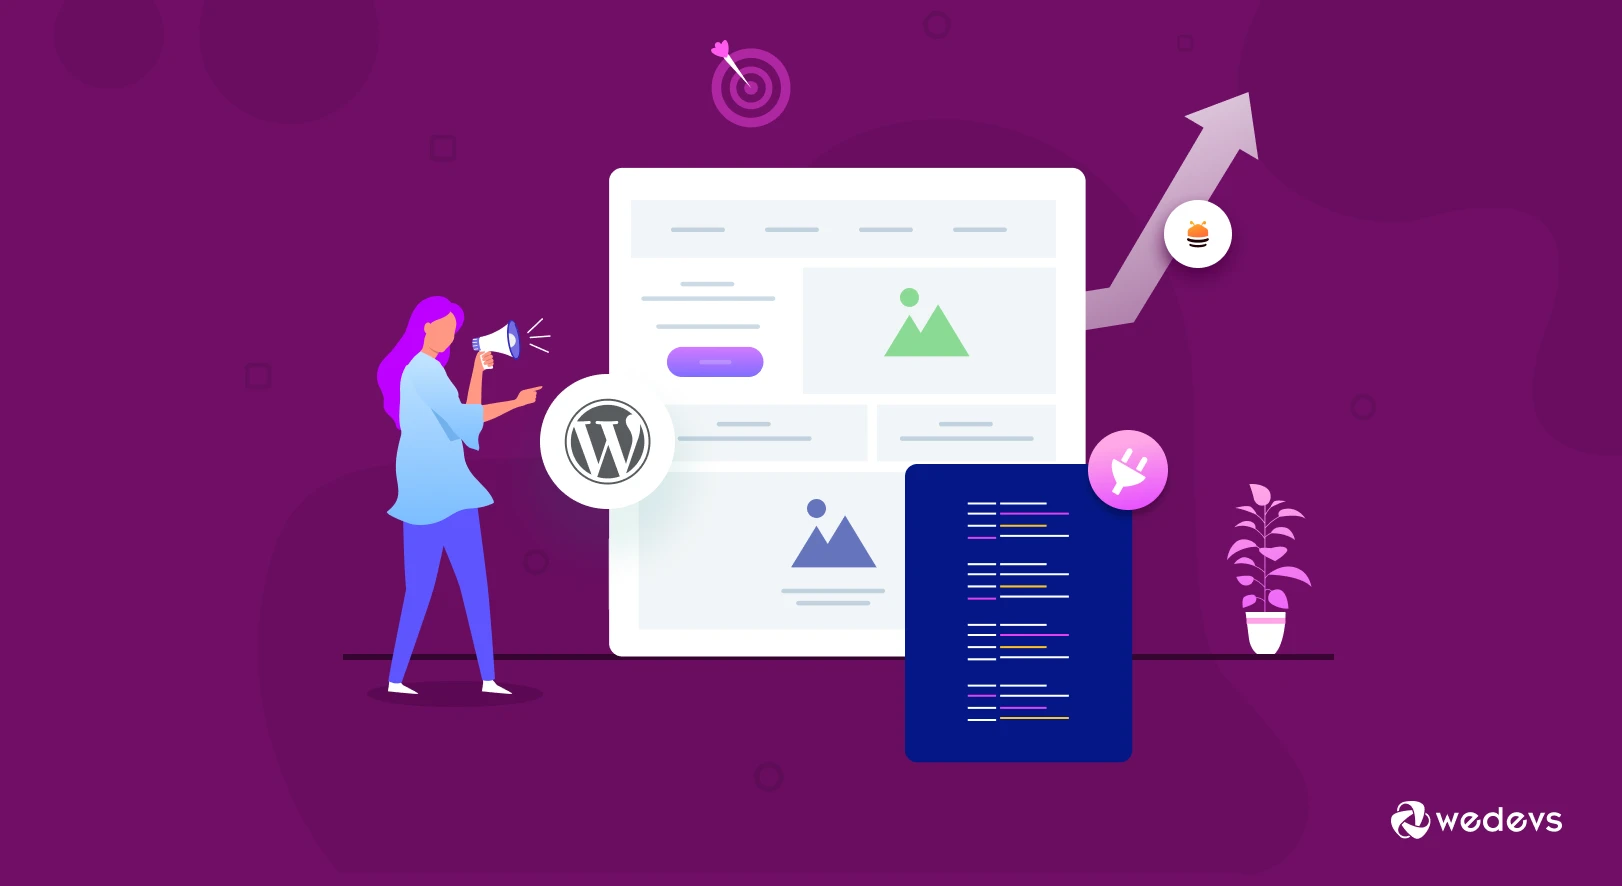 Where and How to Promote WordPress Plugins &#038; Themes- A Guide for Entrepreneurs